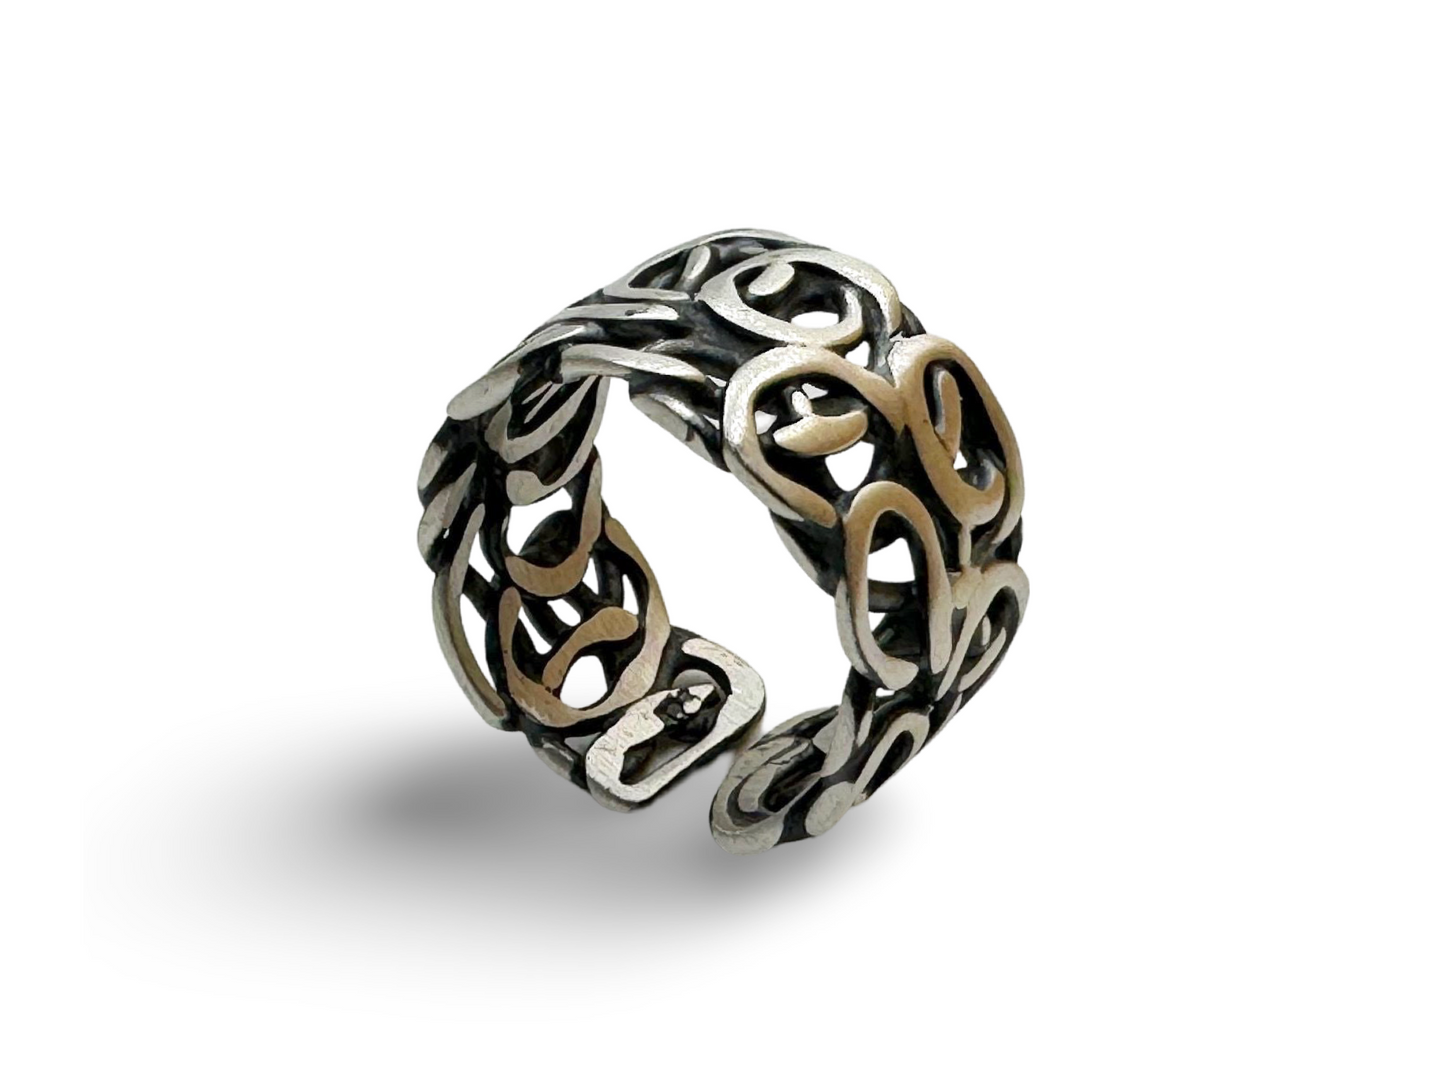 Boho Adjustable Ring Oxidised Sterling Silver 925 for Men and Women